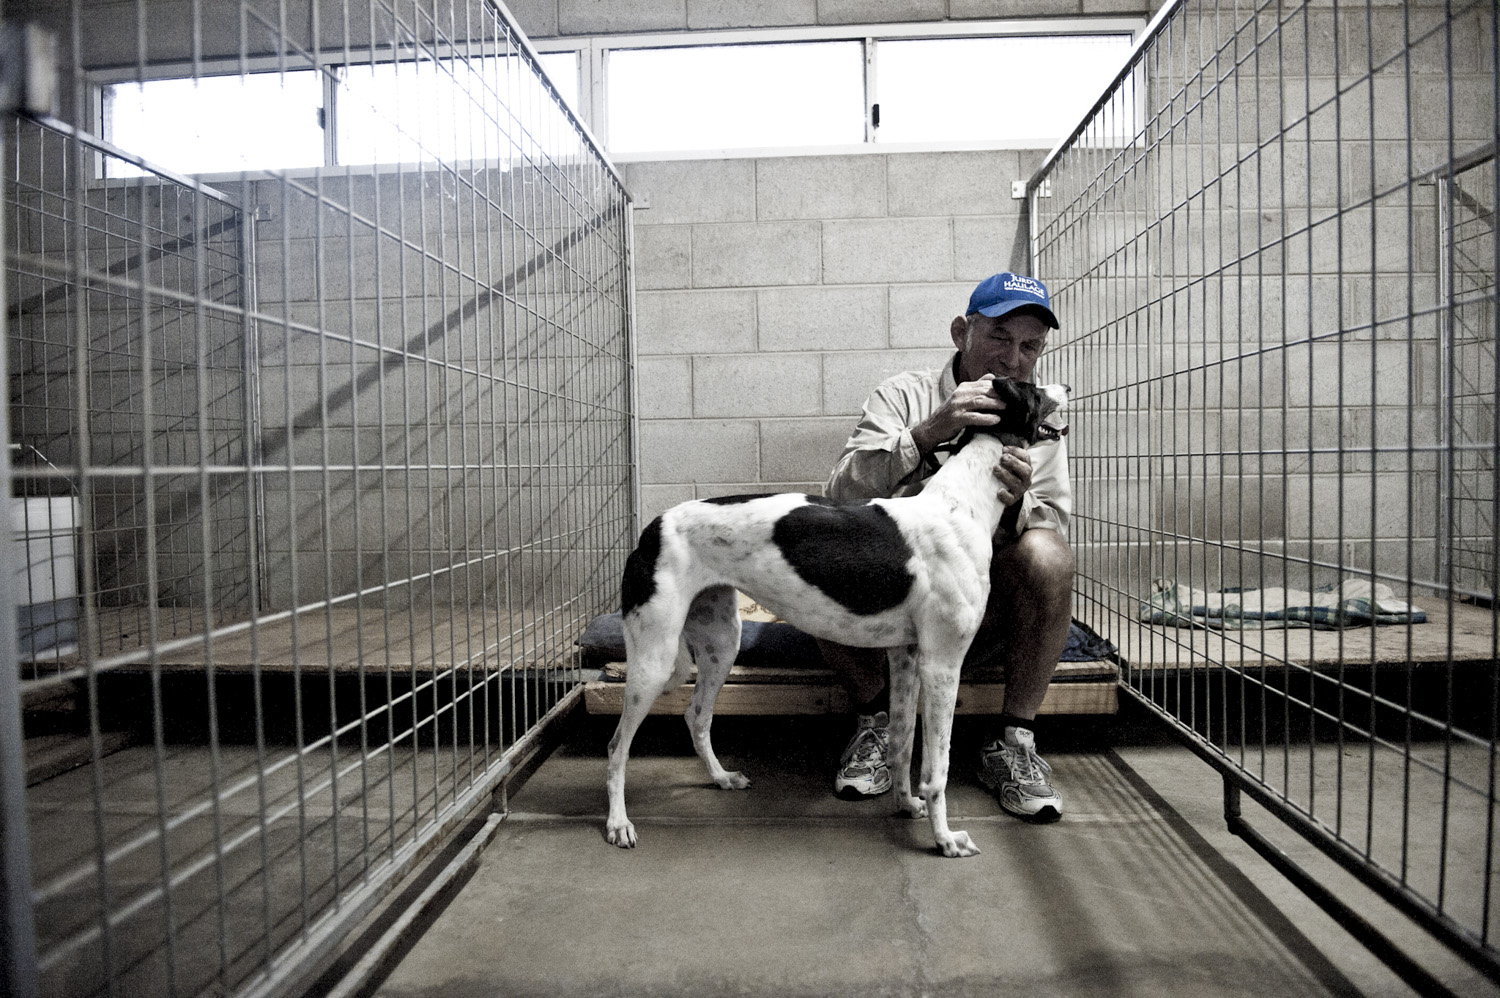 image of AARONTAIT COPYRIGHTED 2014 440 DOCUMENTARY PHOTOGRAPHER REPORTAGE LIFE SPORT DOGS GREYHOUND RACING STORY HUMAN DISHLICKER DISH LICKER FAITH LOVE TRUST LIFE